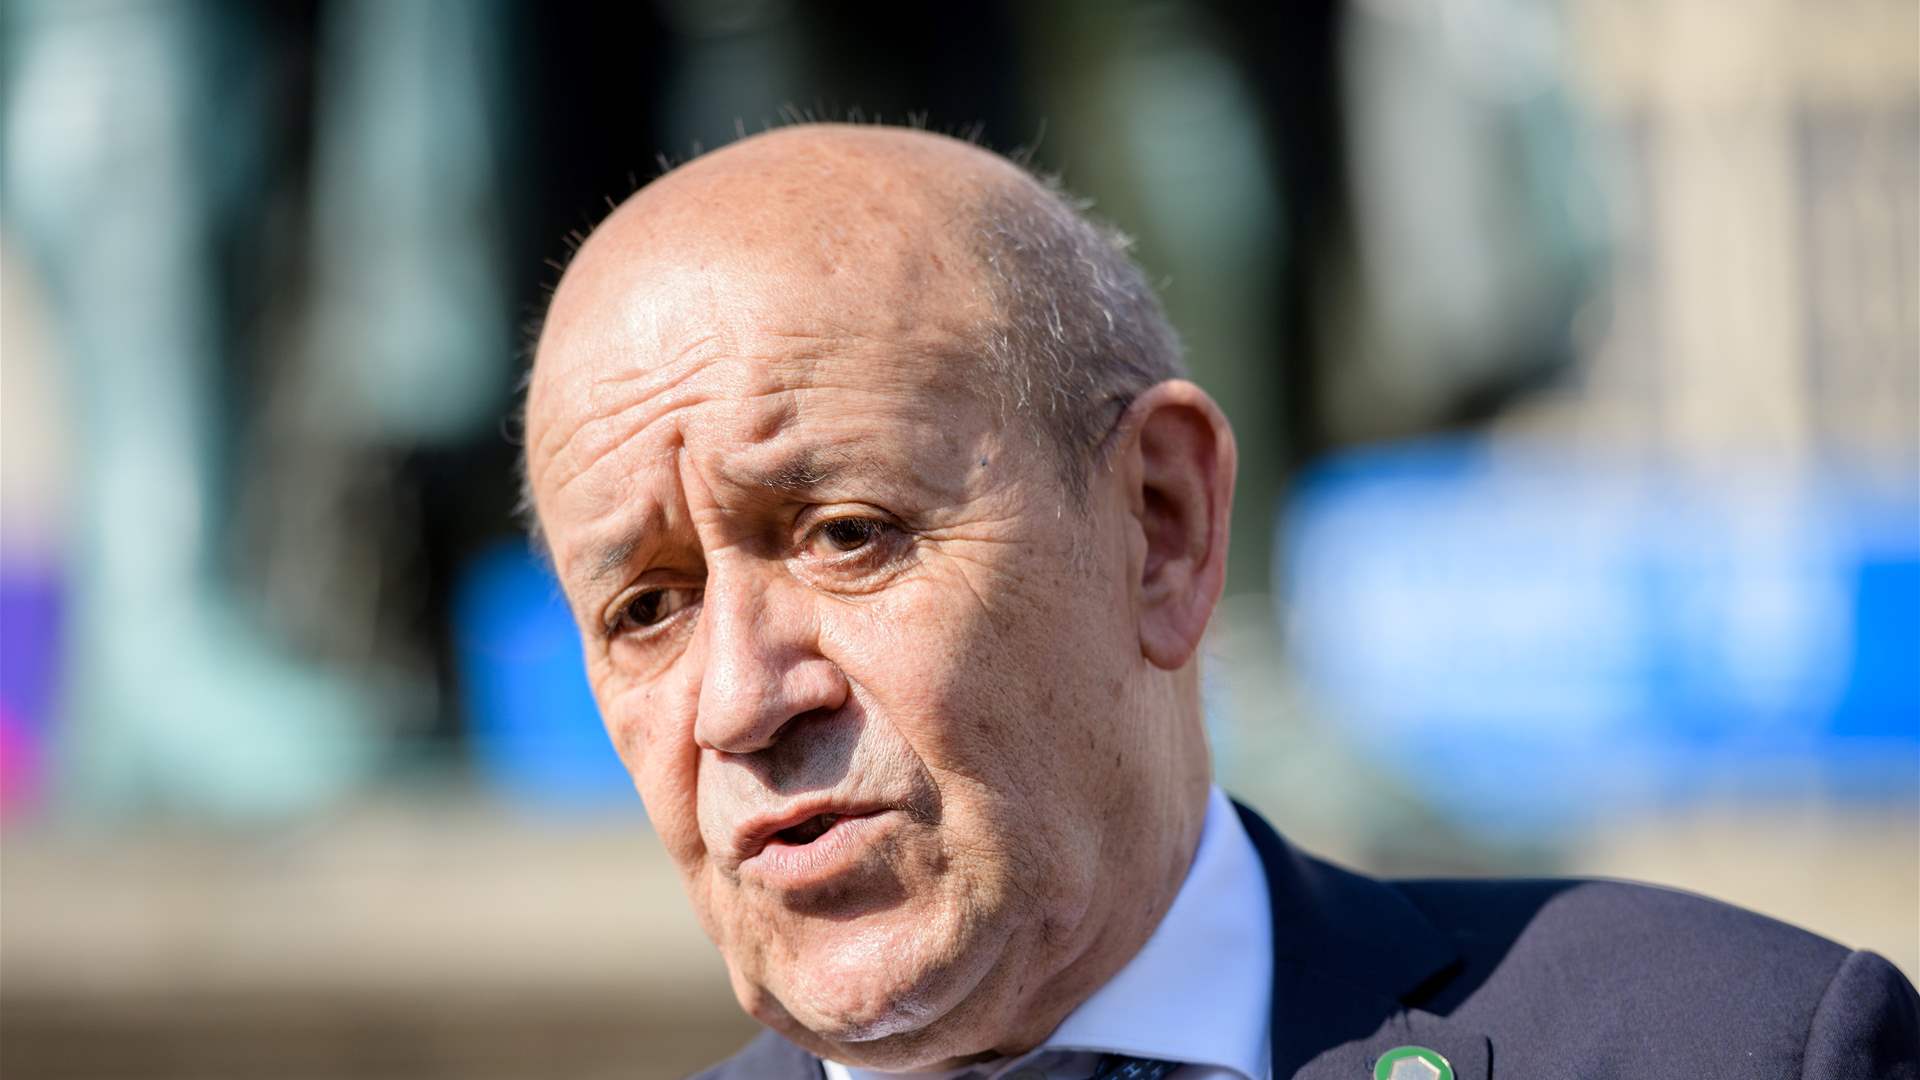 Uncertain mission: French Envoy Le Drian returns to Lebanon